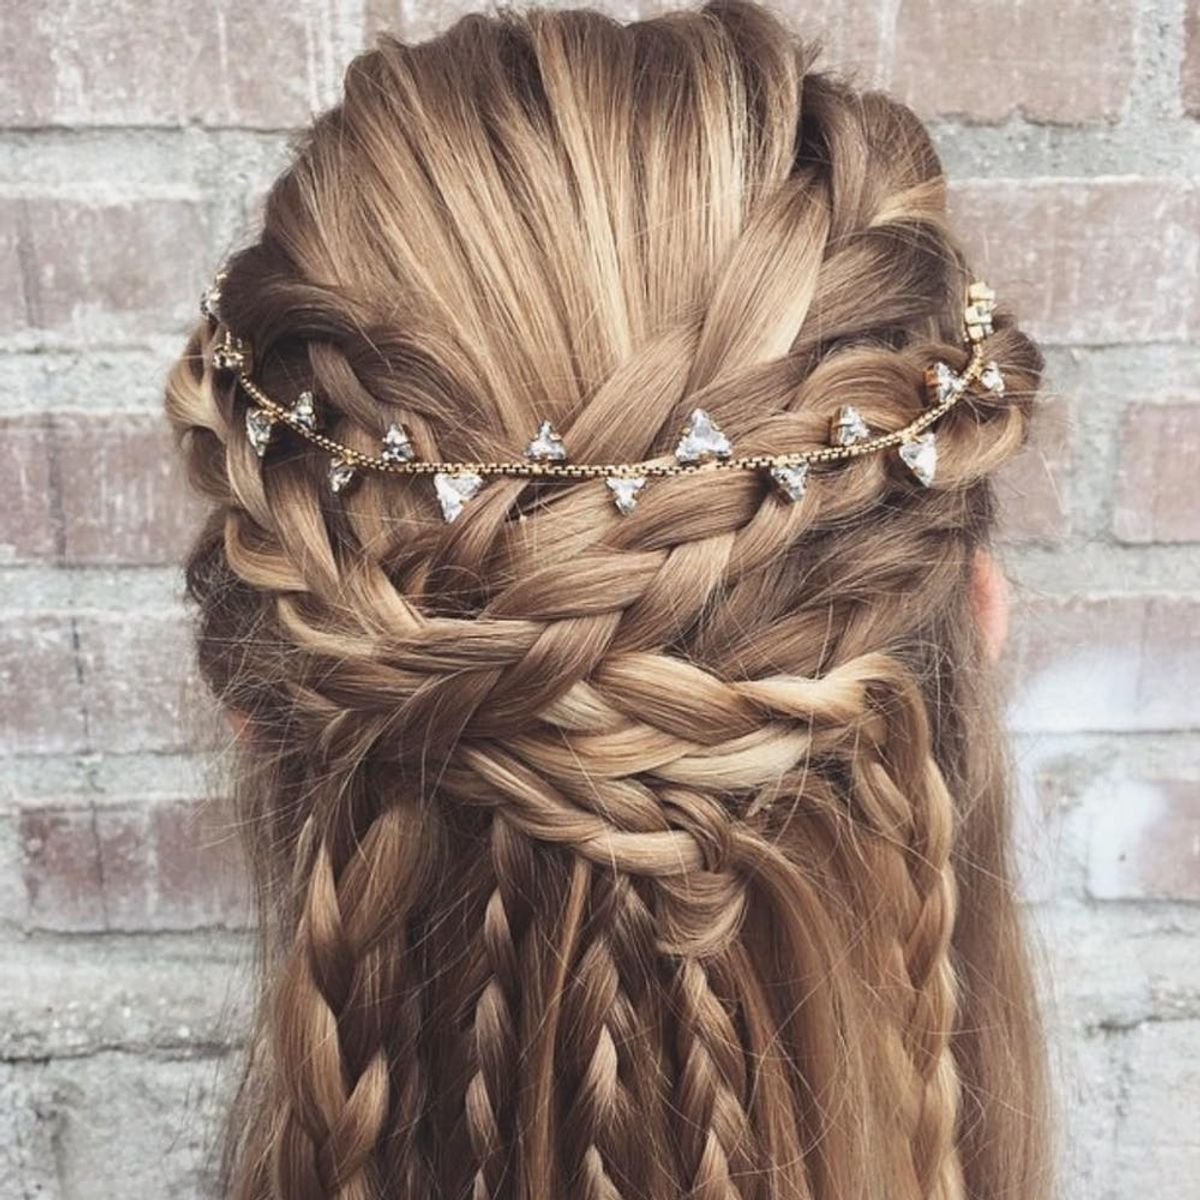 These 15 Half-Up ‘Dos Are the Perfect Bridal Hairspiration